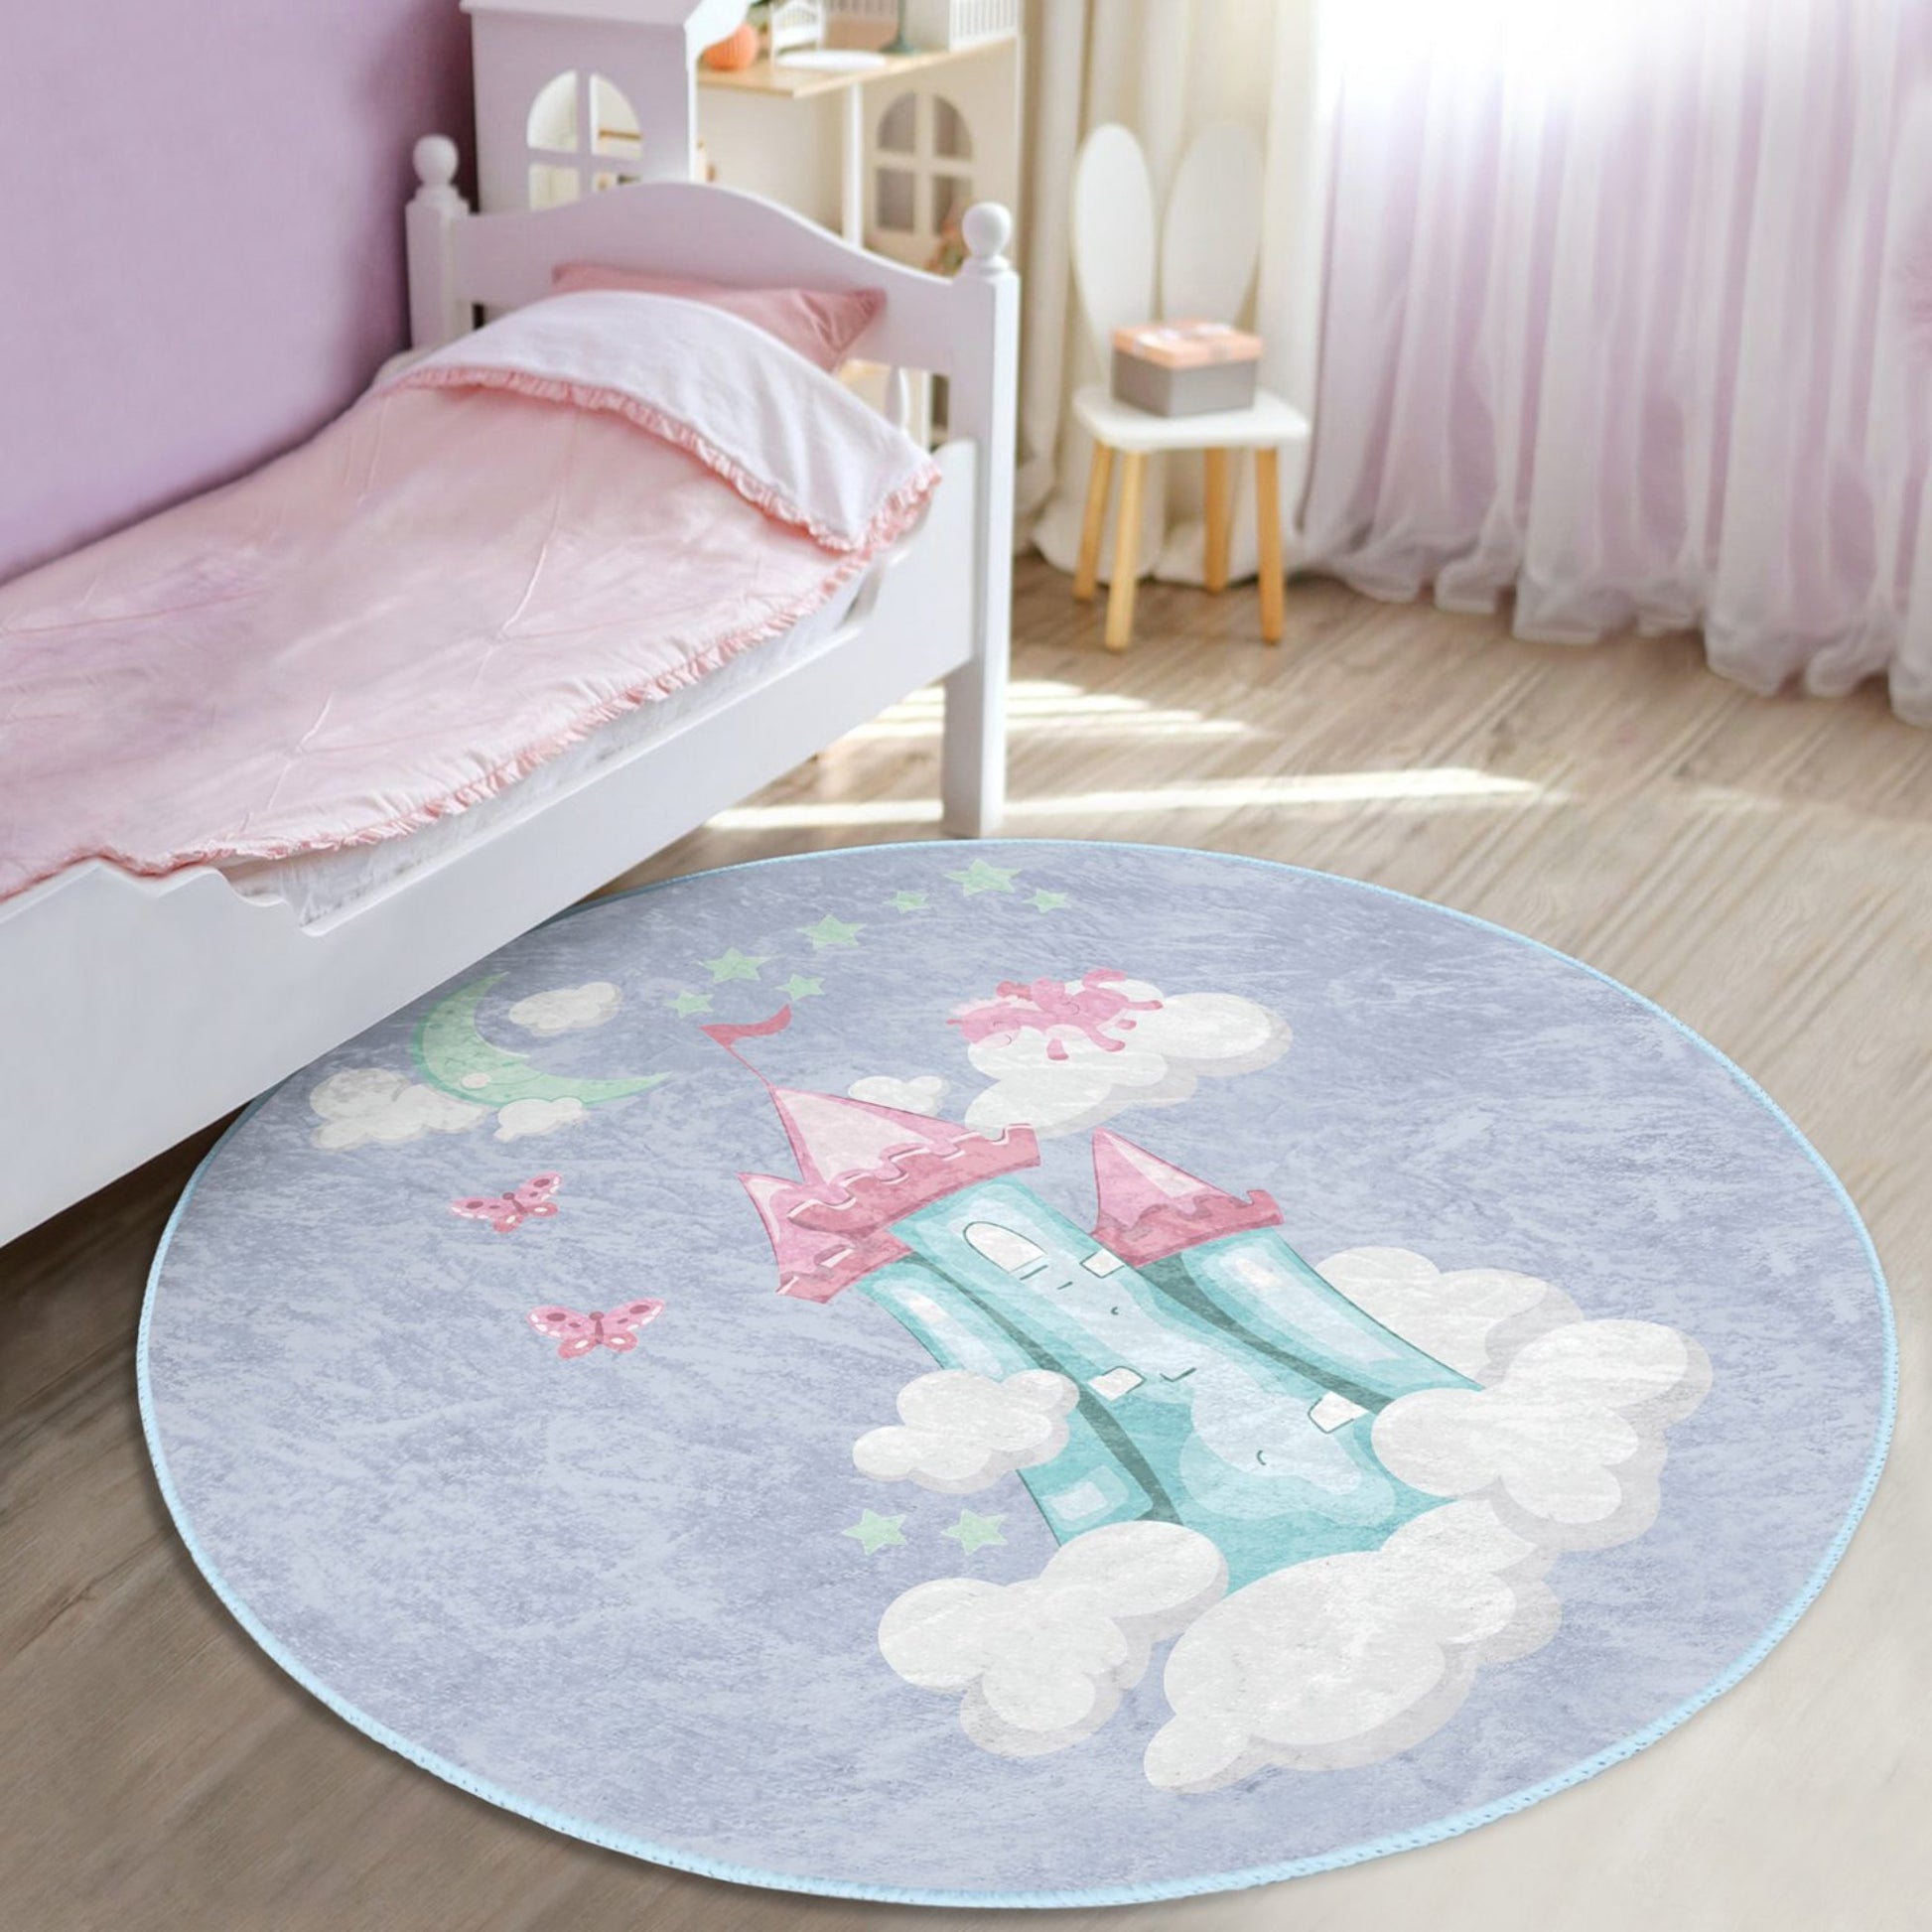 Round Castle Patterned Floor Rug - Charming Accent